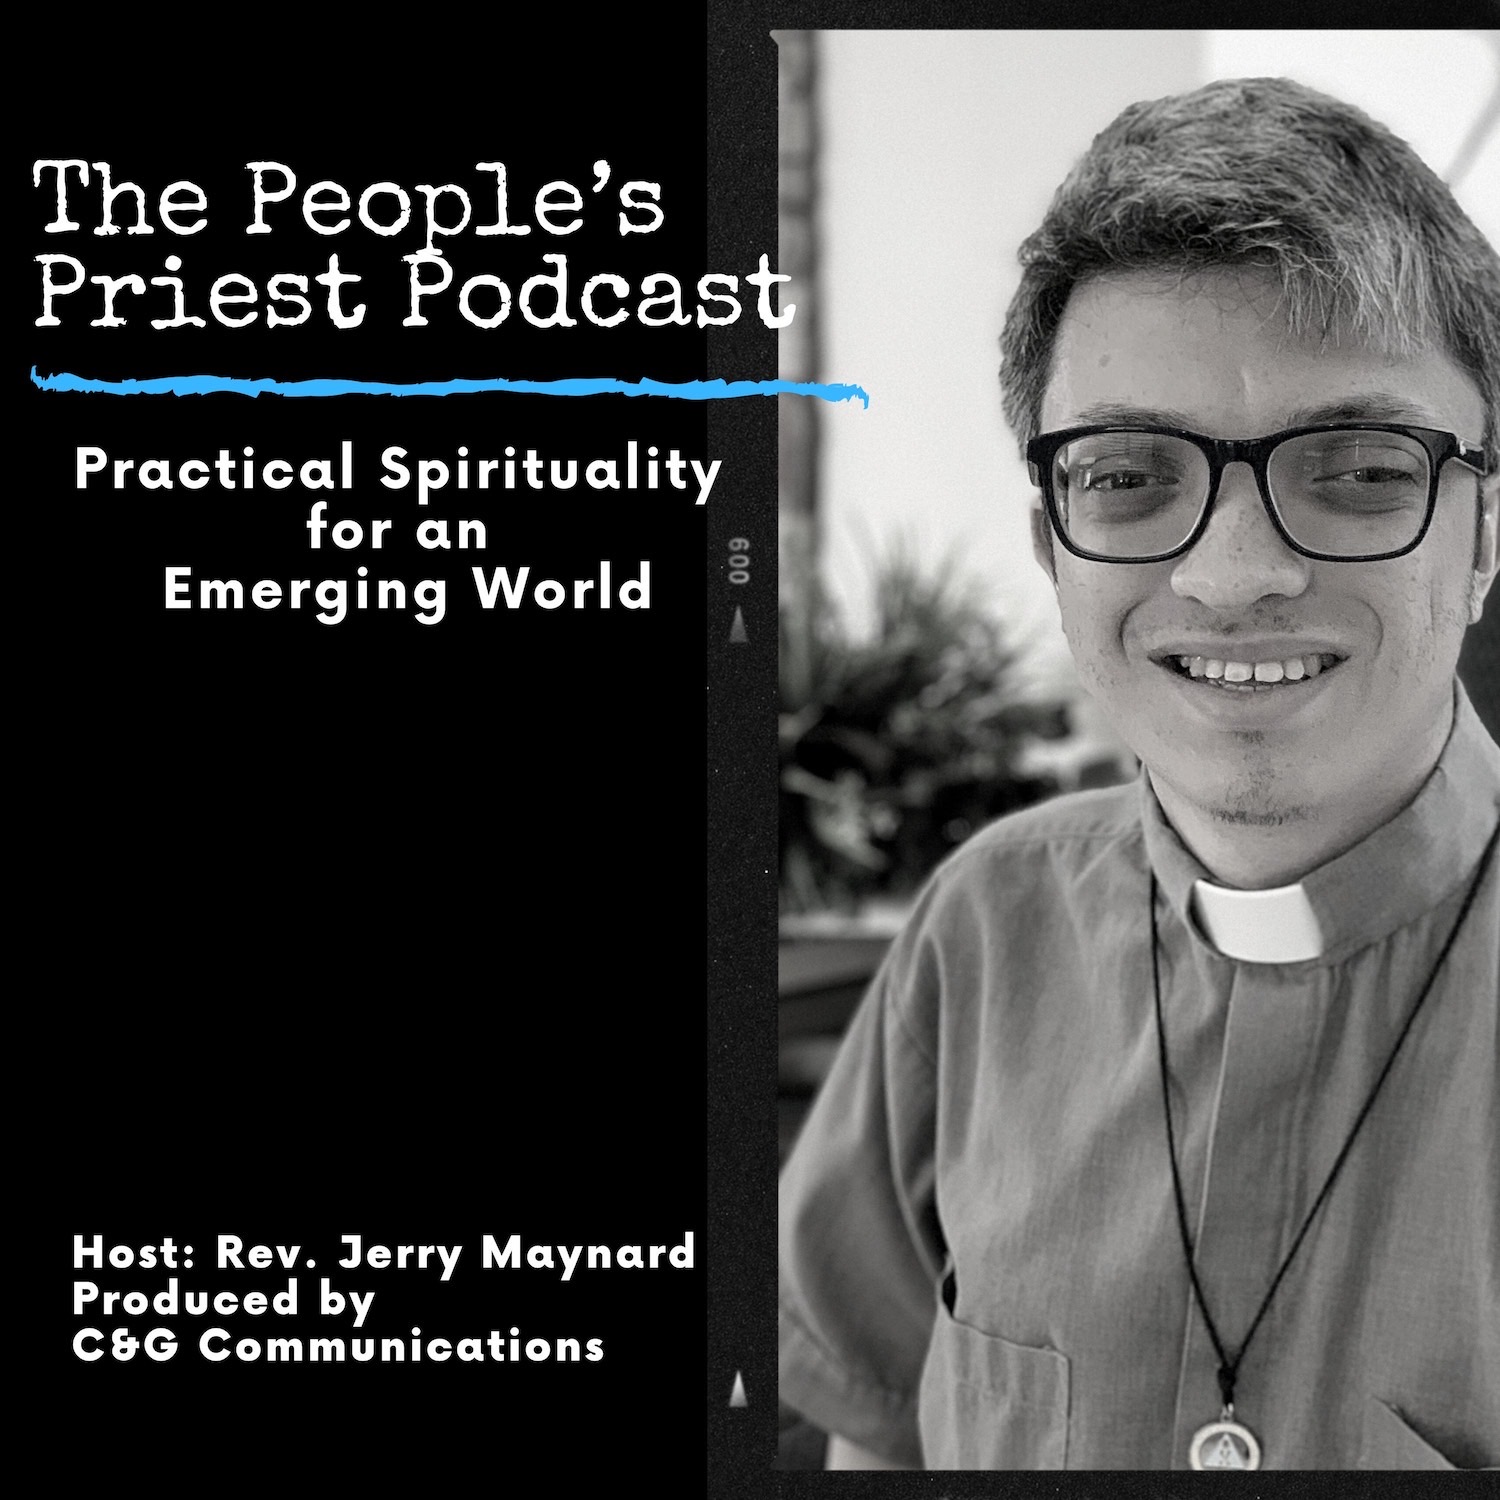 The People’s Priest Podcast